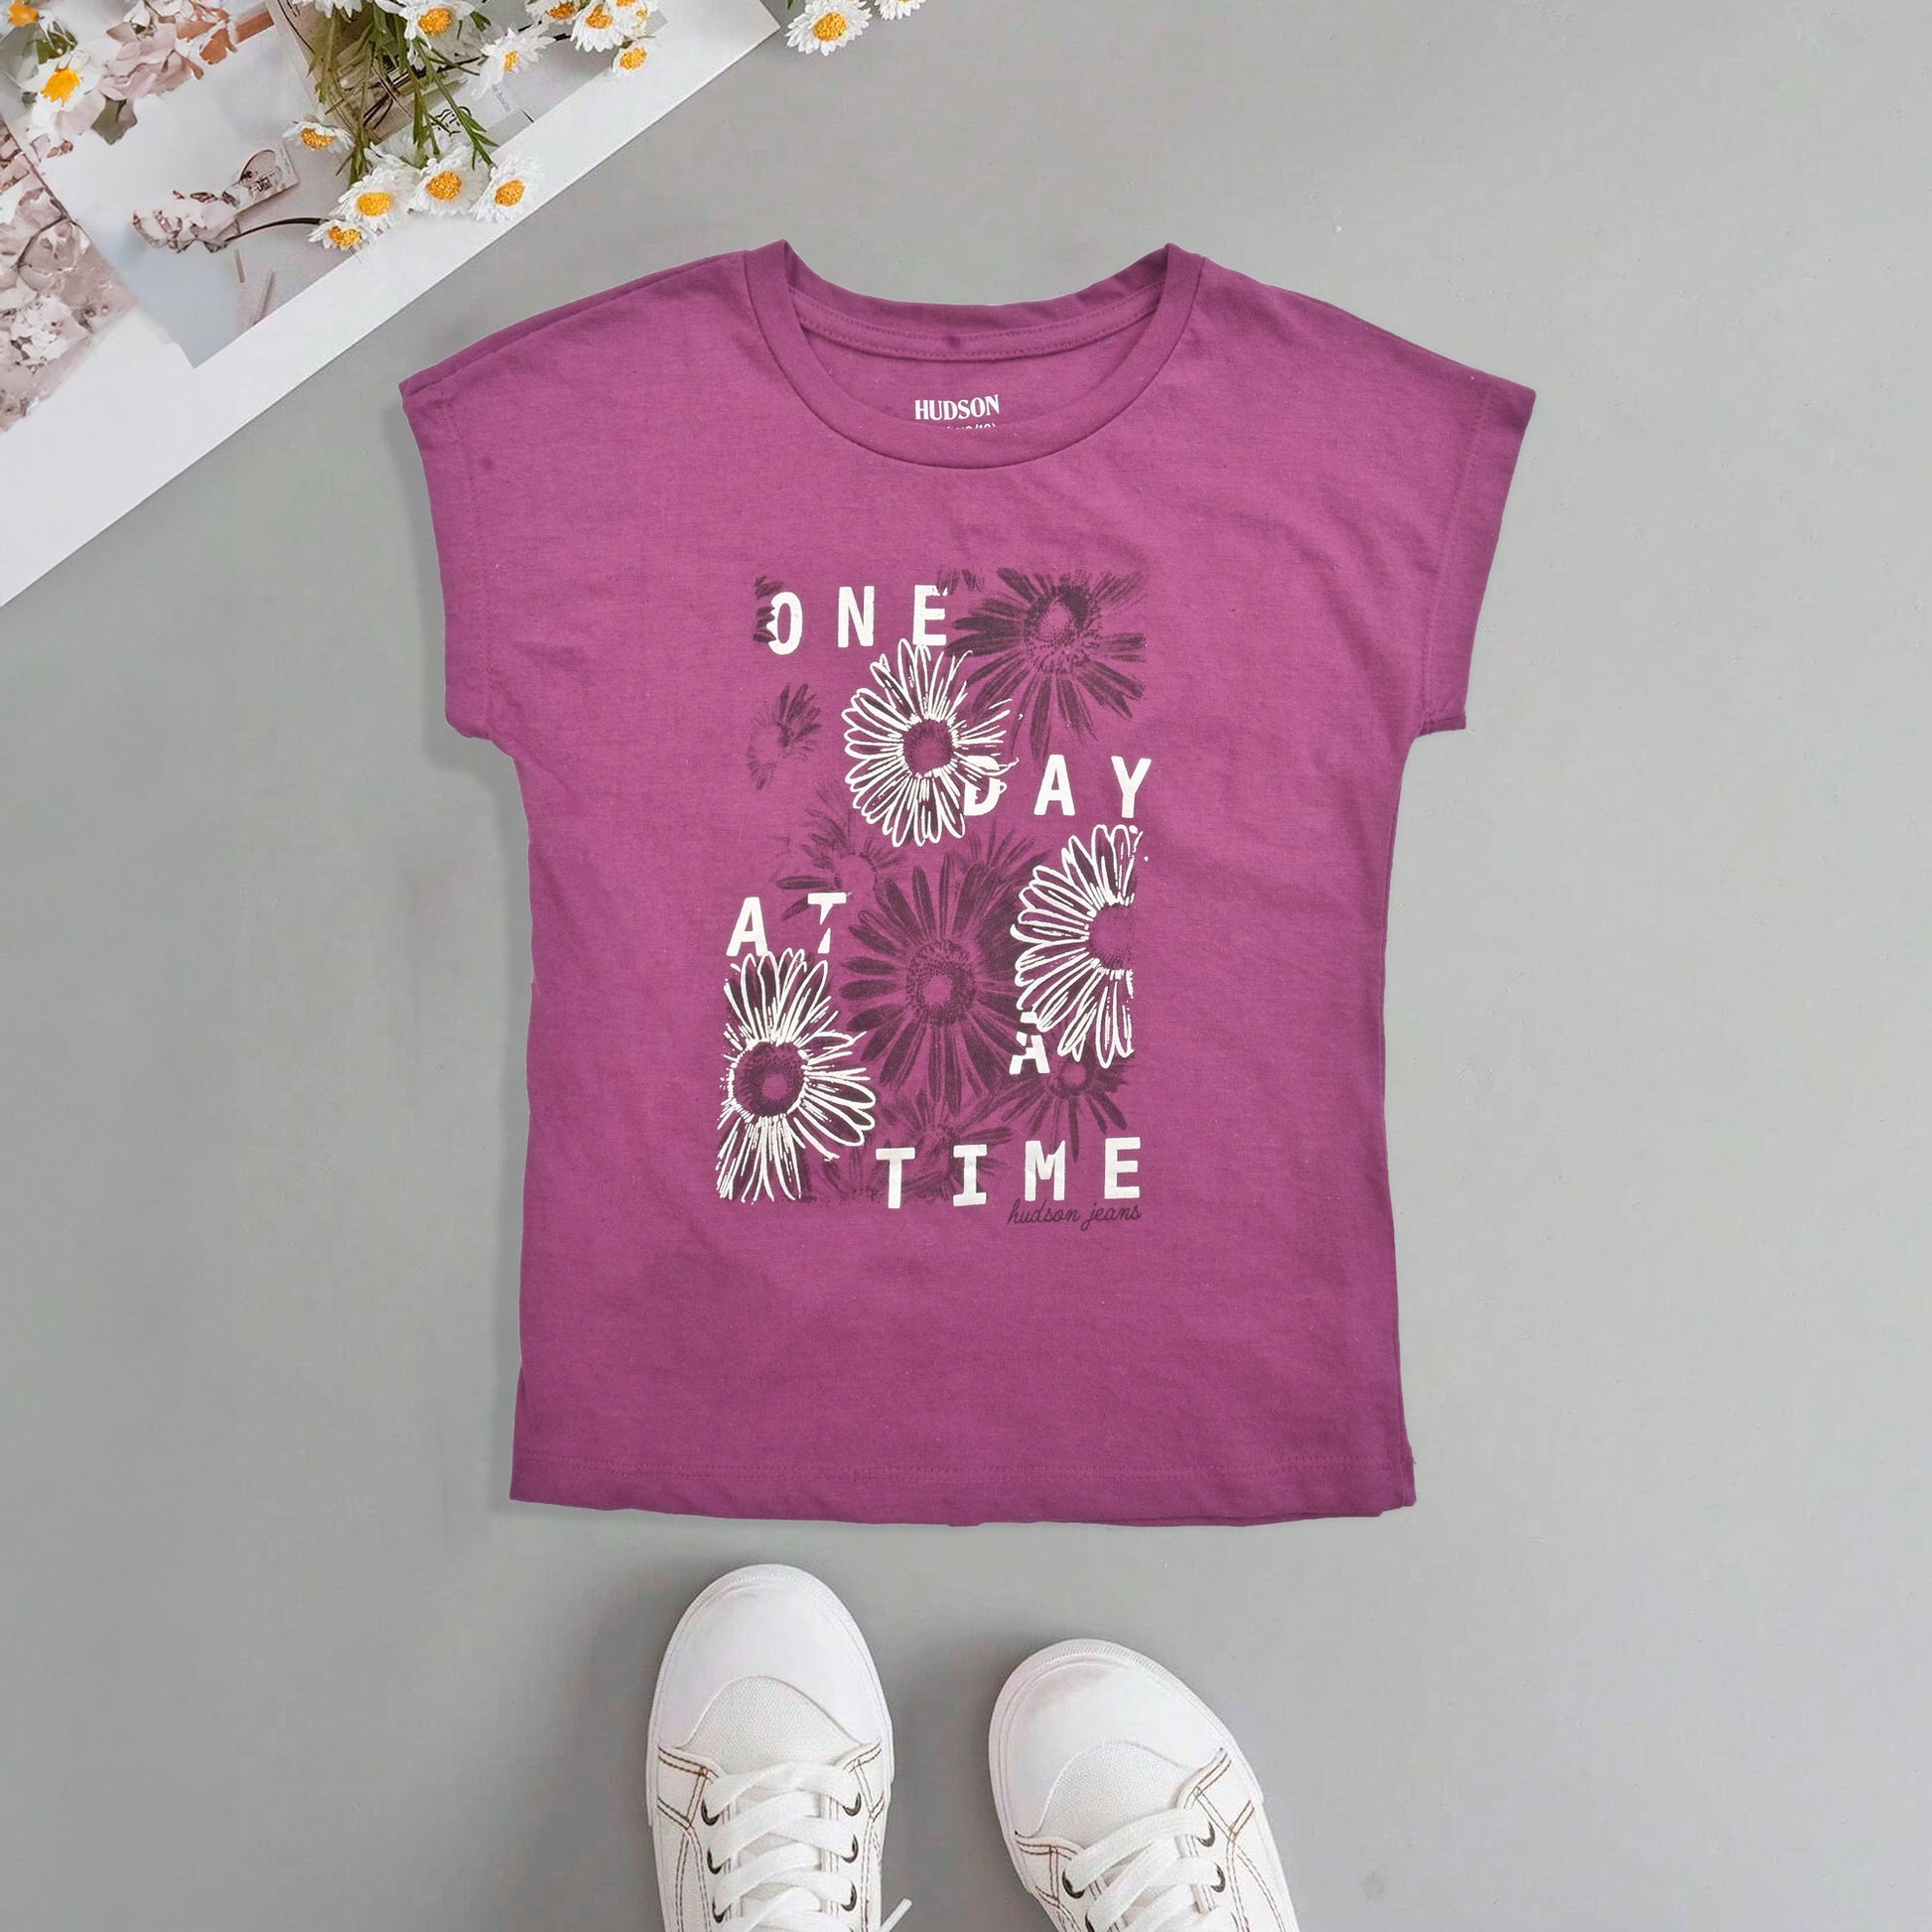 Hudson Girl's One Day At Time Printed Tee Shirt